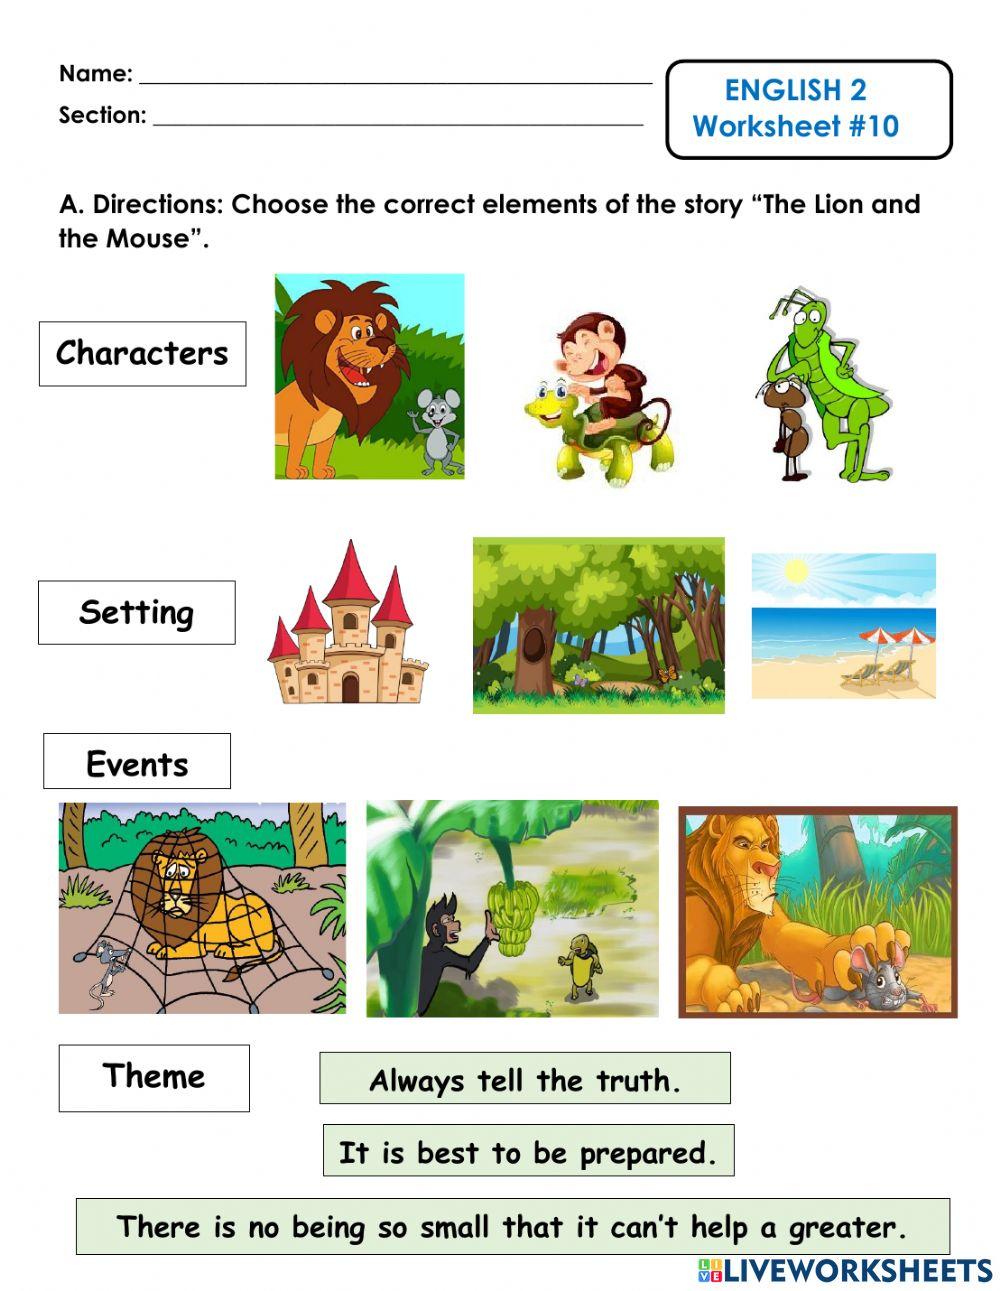 English - Elements of the Story